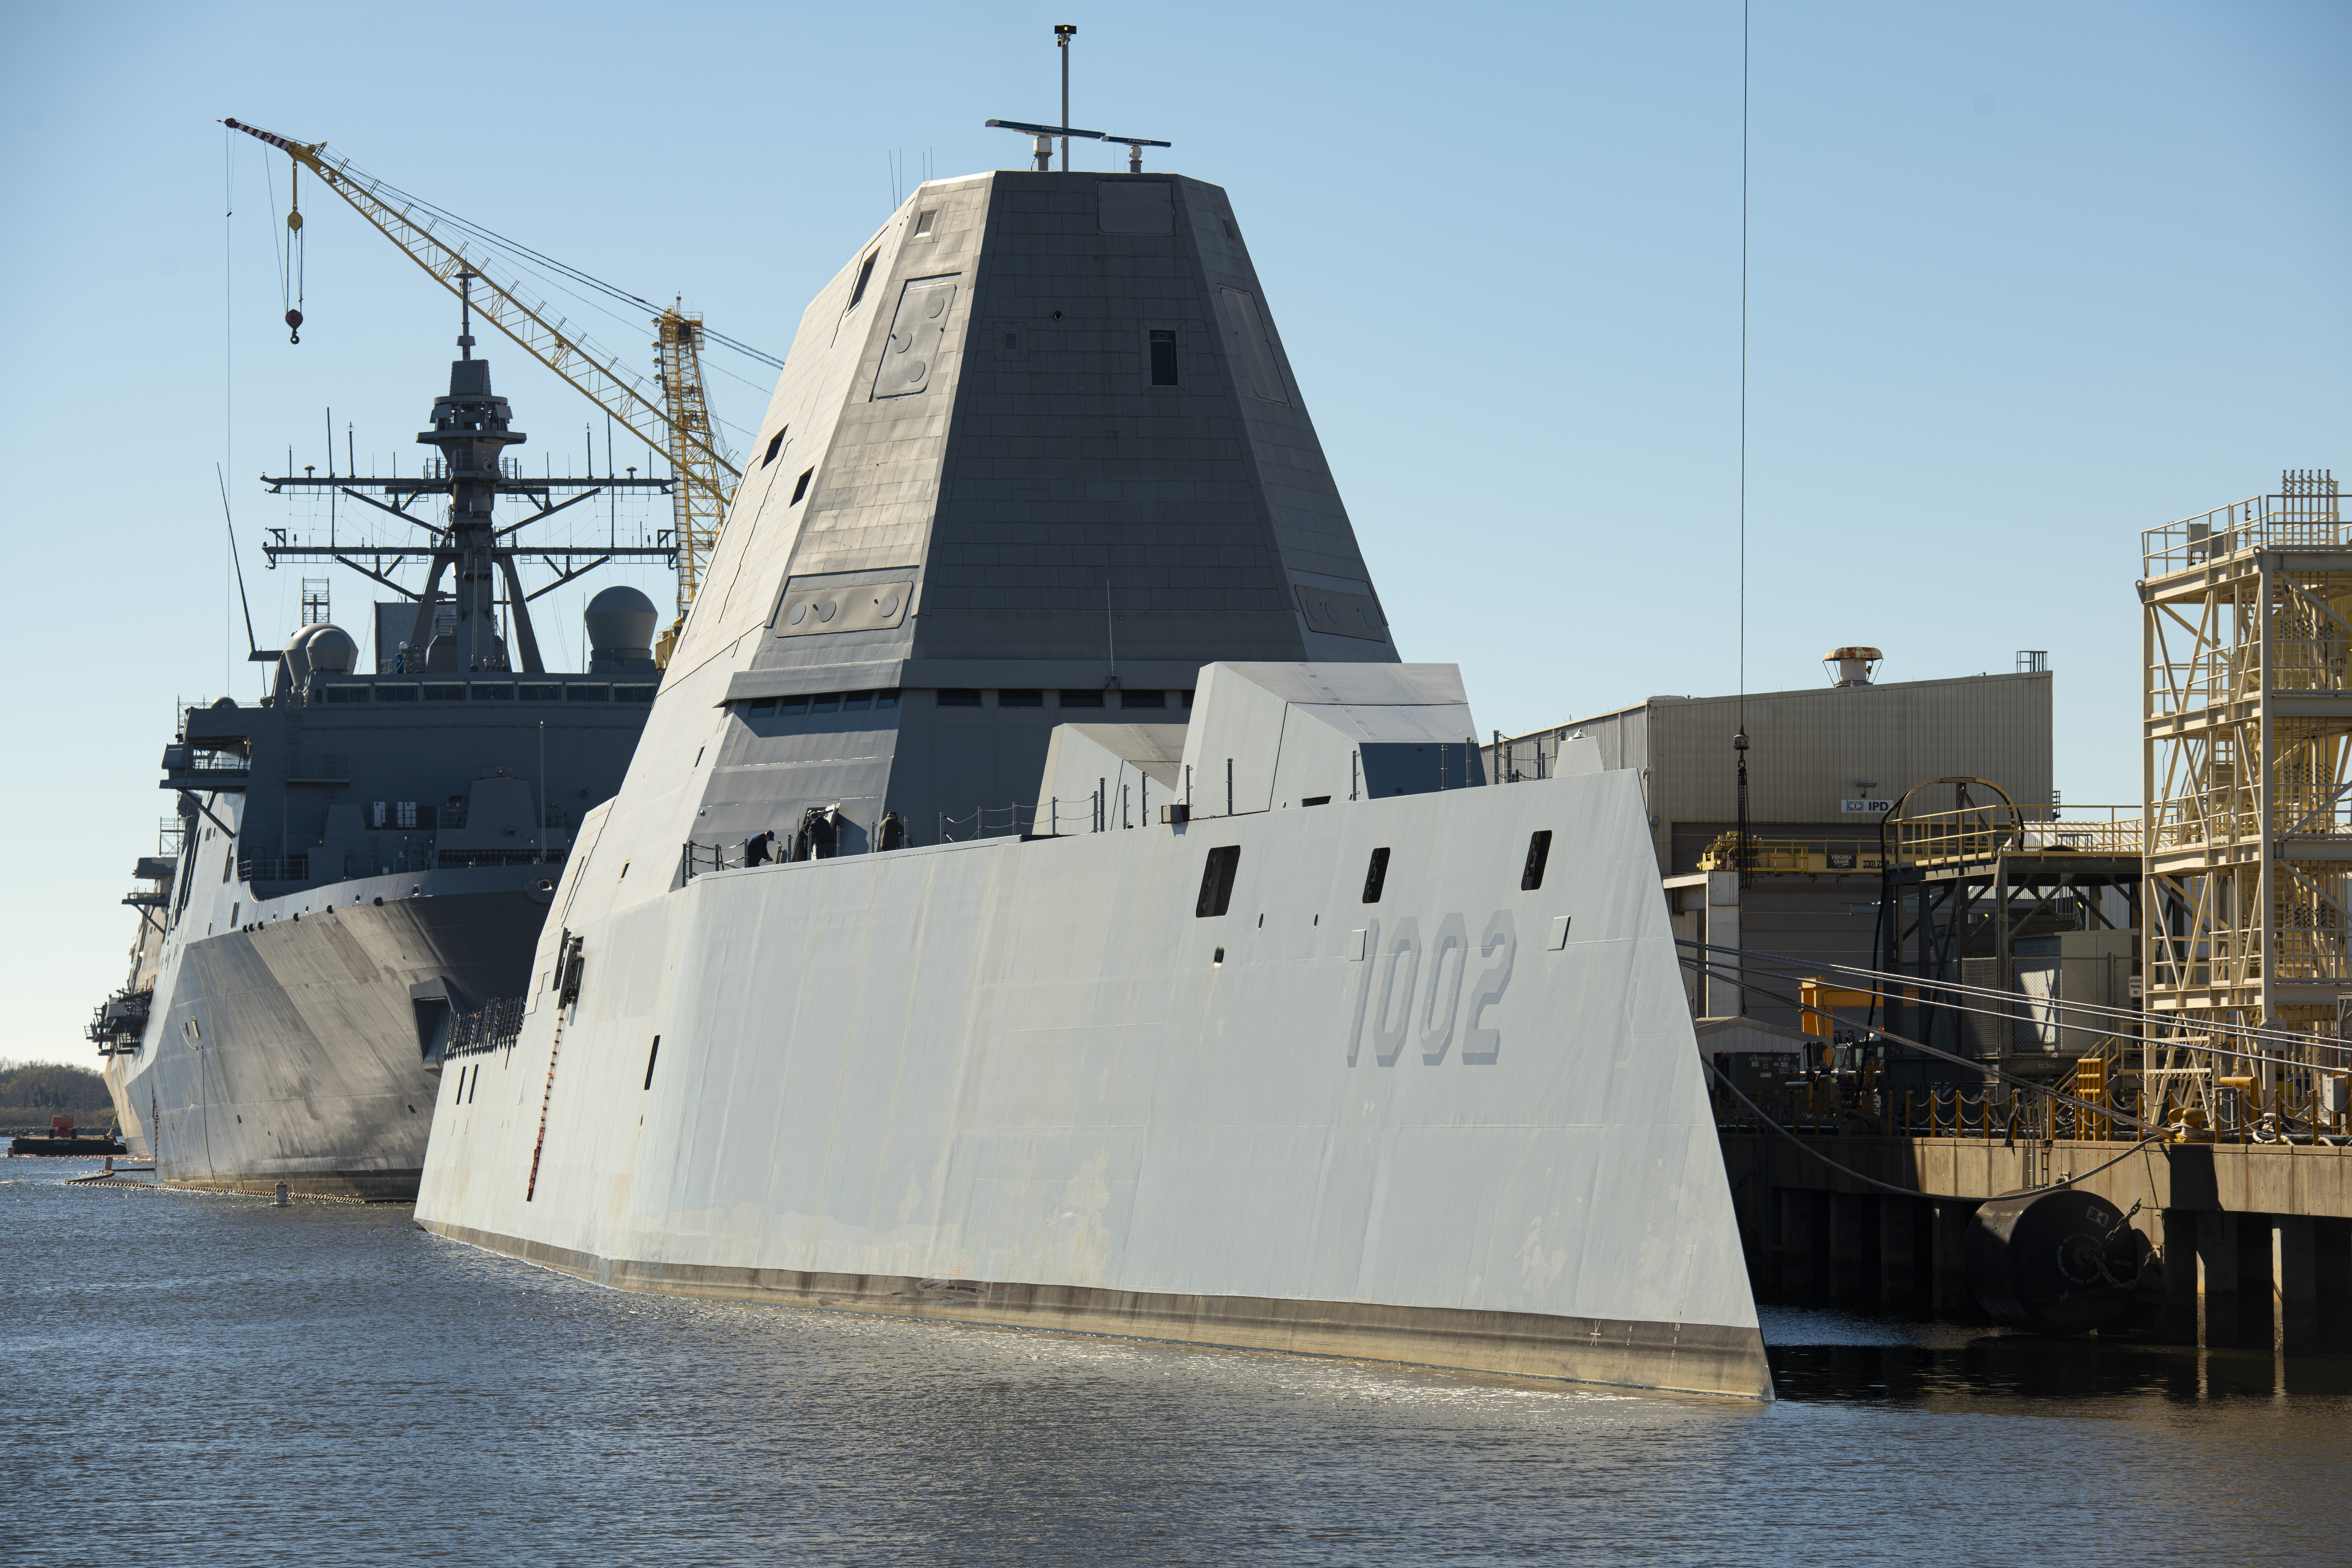 Zumwalt-class destroyer, Lyndon B. Johnson (DDG 1002) is seen docked at HII's Ingalls Shipbuilding where work will begin on the Combat Systems Availability.